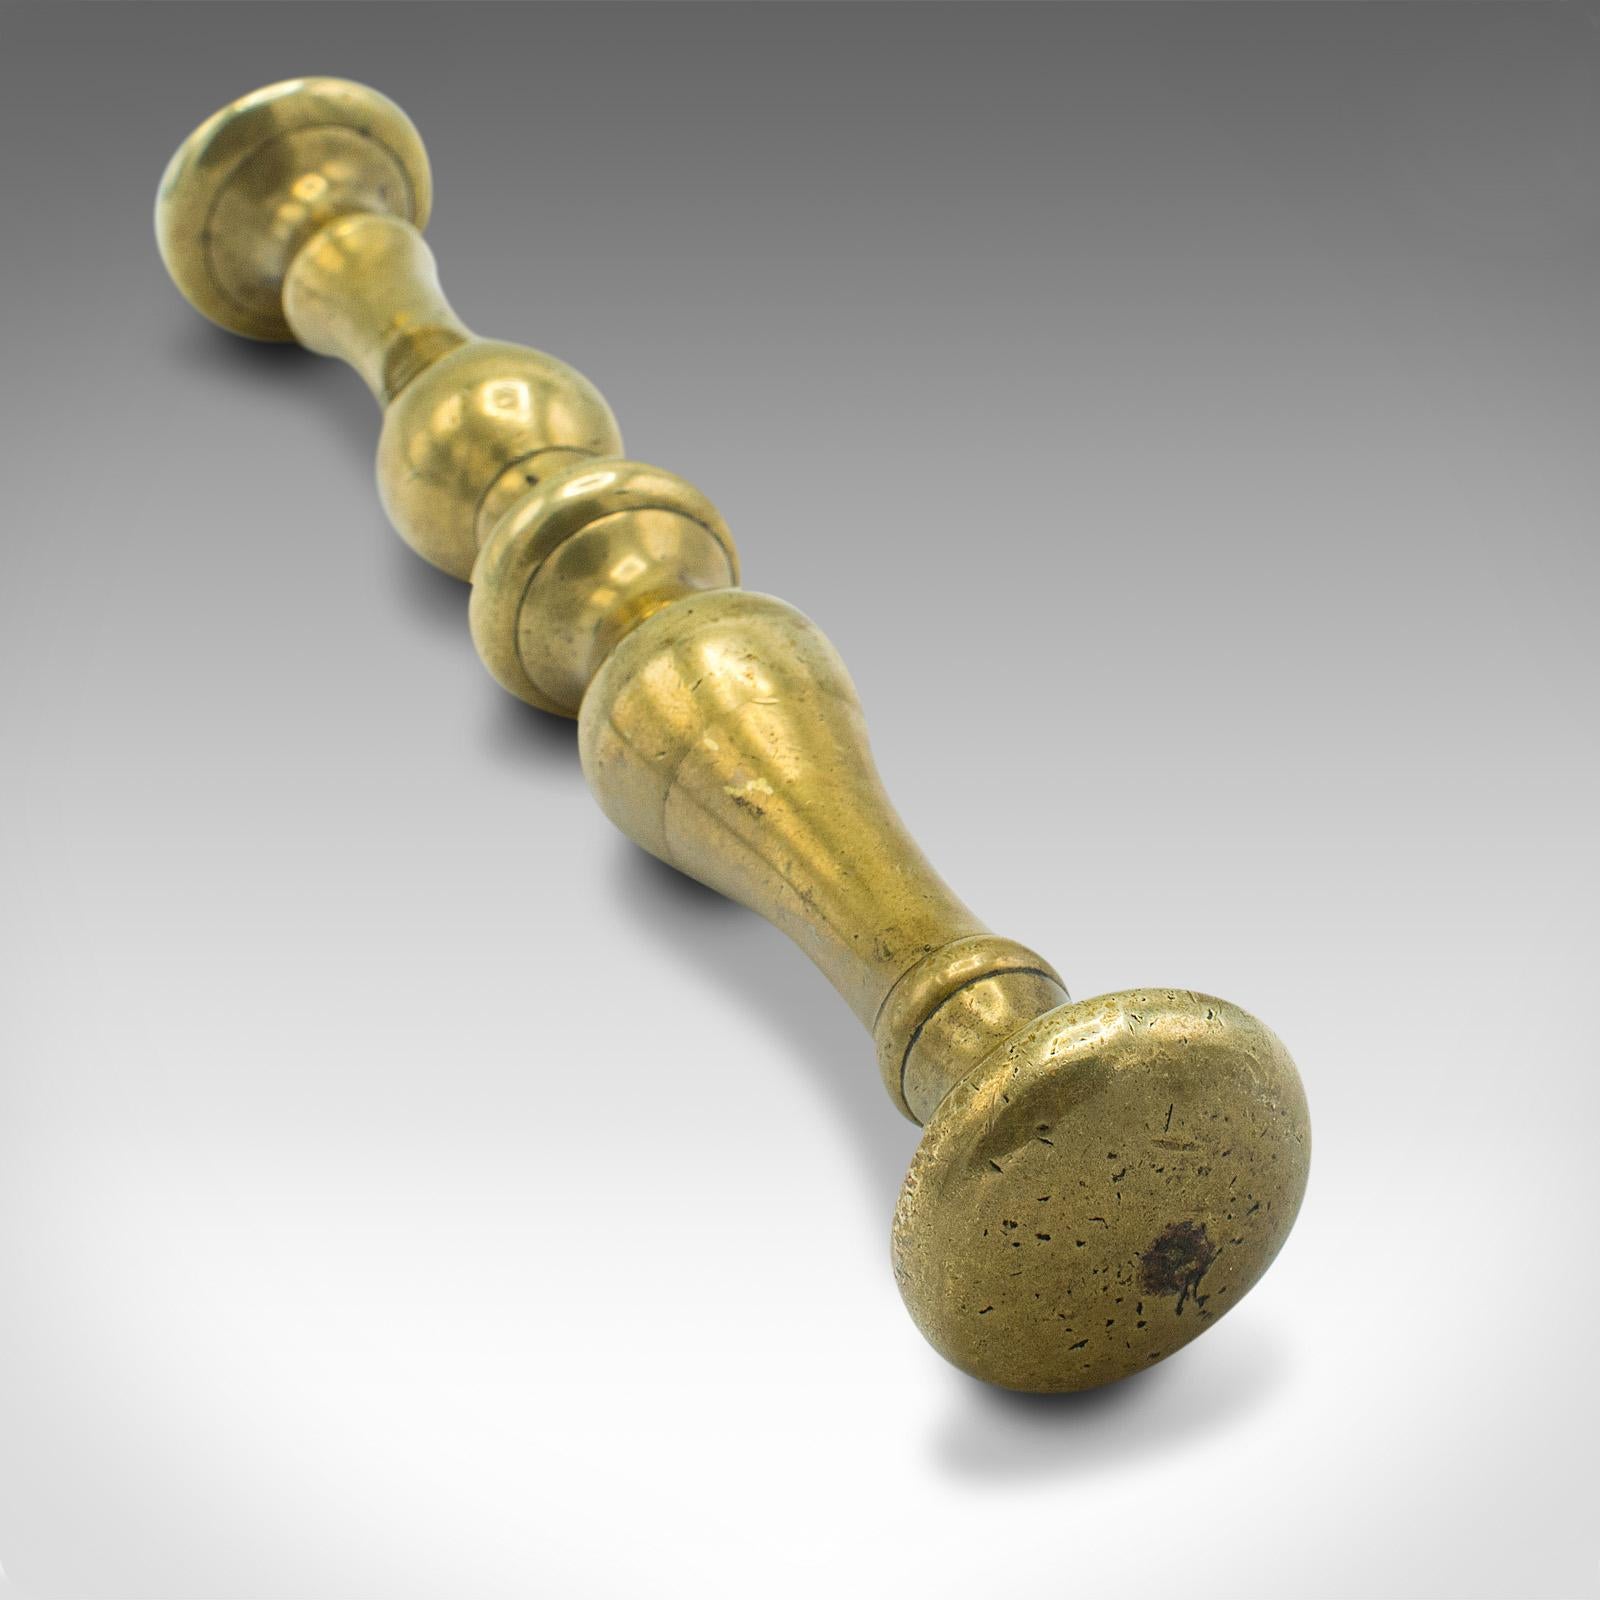 Antique Apothecary Mortar and Pestle, English, Brass, Chemist, Victorian, C.1850 For Sale 3